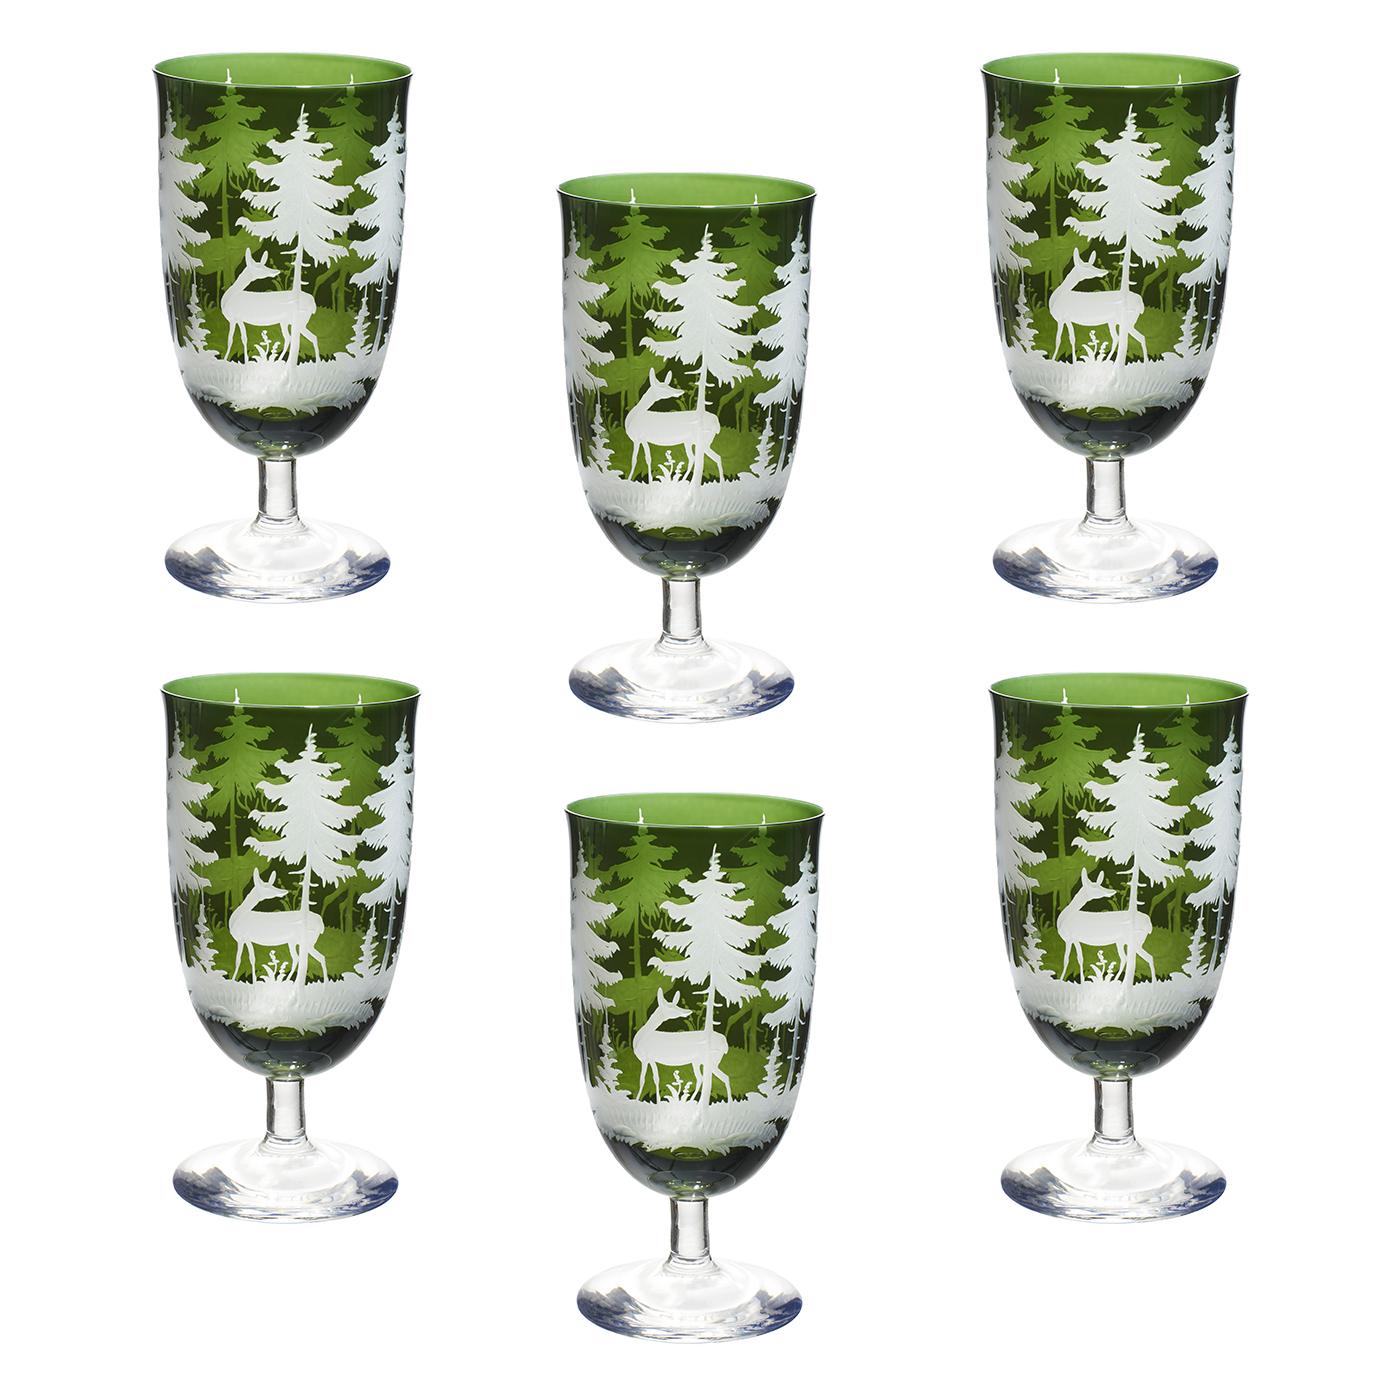 Set of six hand blown wine glasses in green crystal with a hand-edged black forest hunting scene all-around. The decor is an antique hunting scene from Bavaria showing deers, trees and bambis all-over the glass in the style of Black Forest. A glass